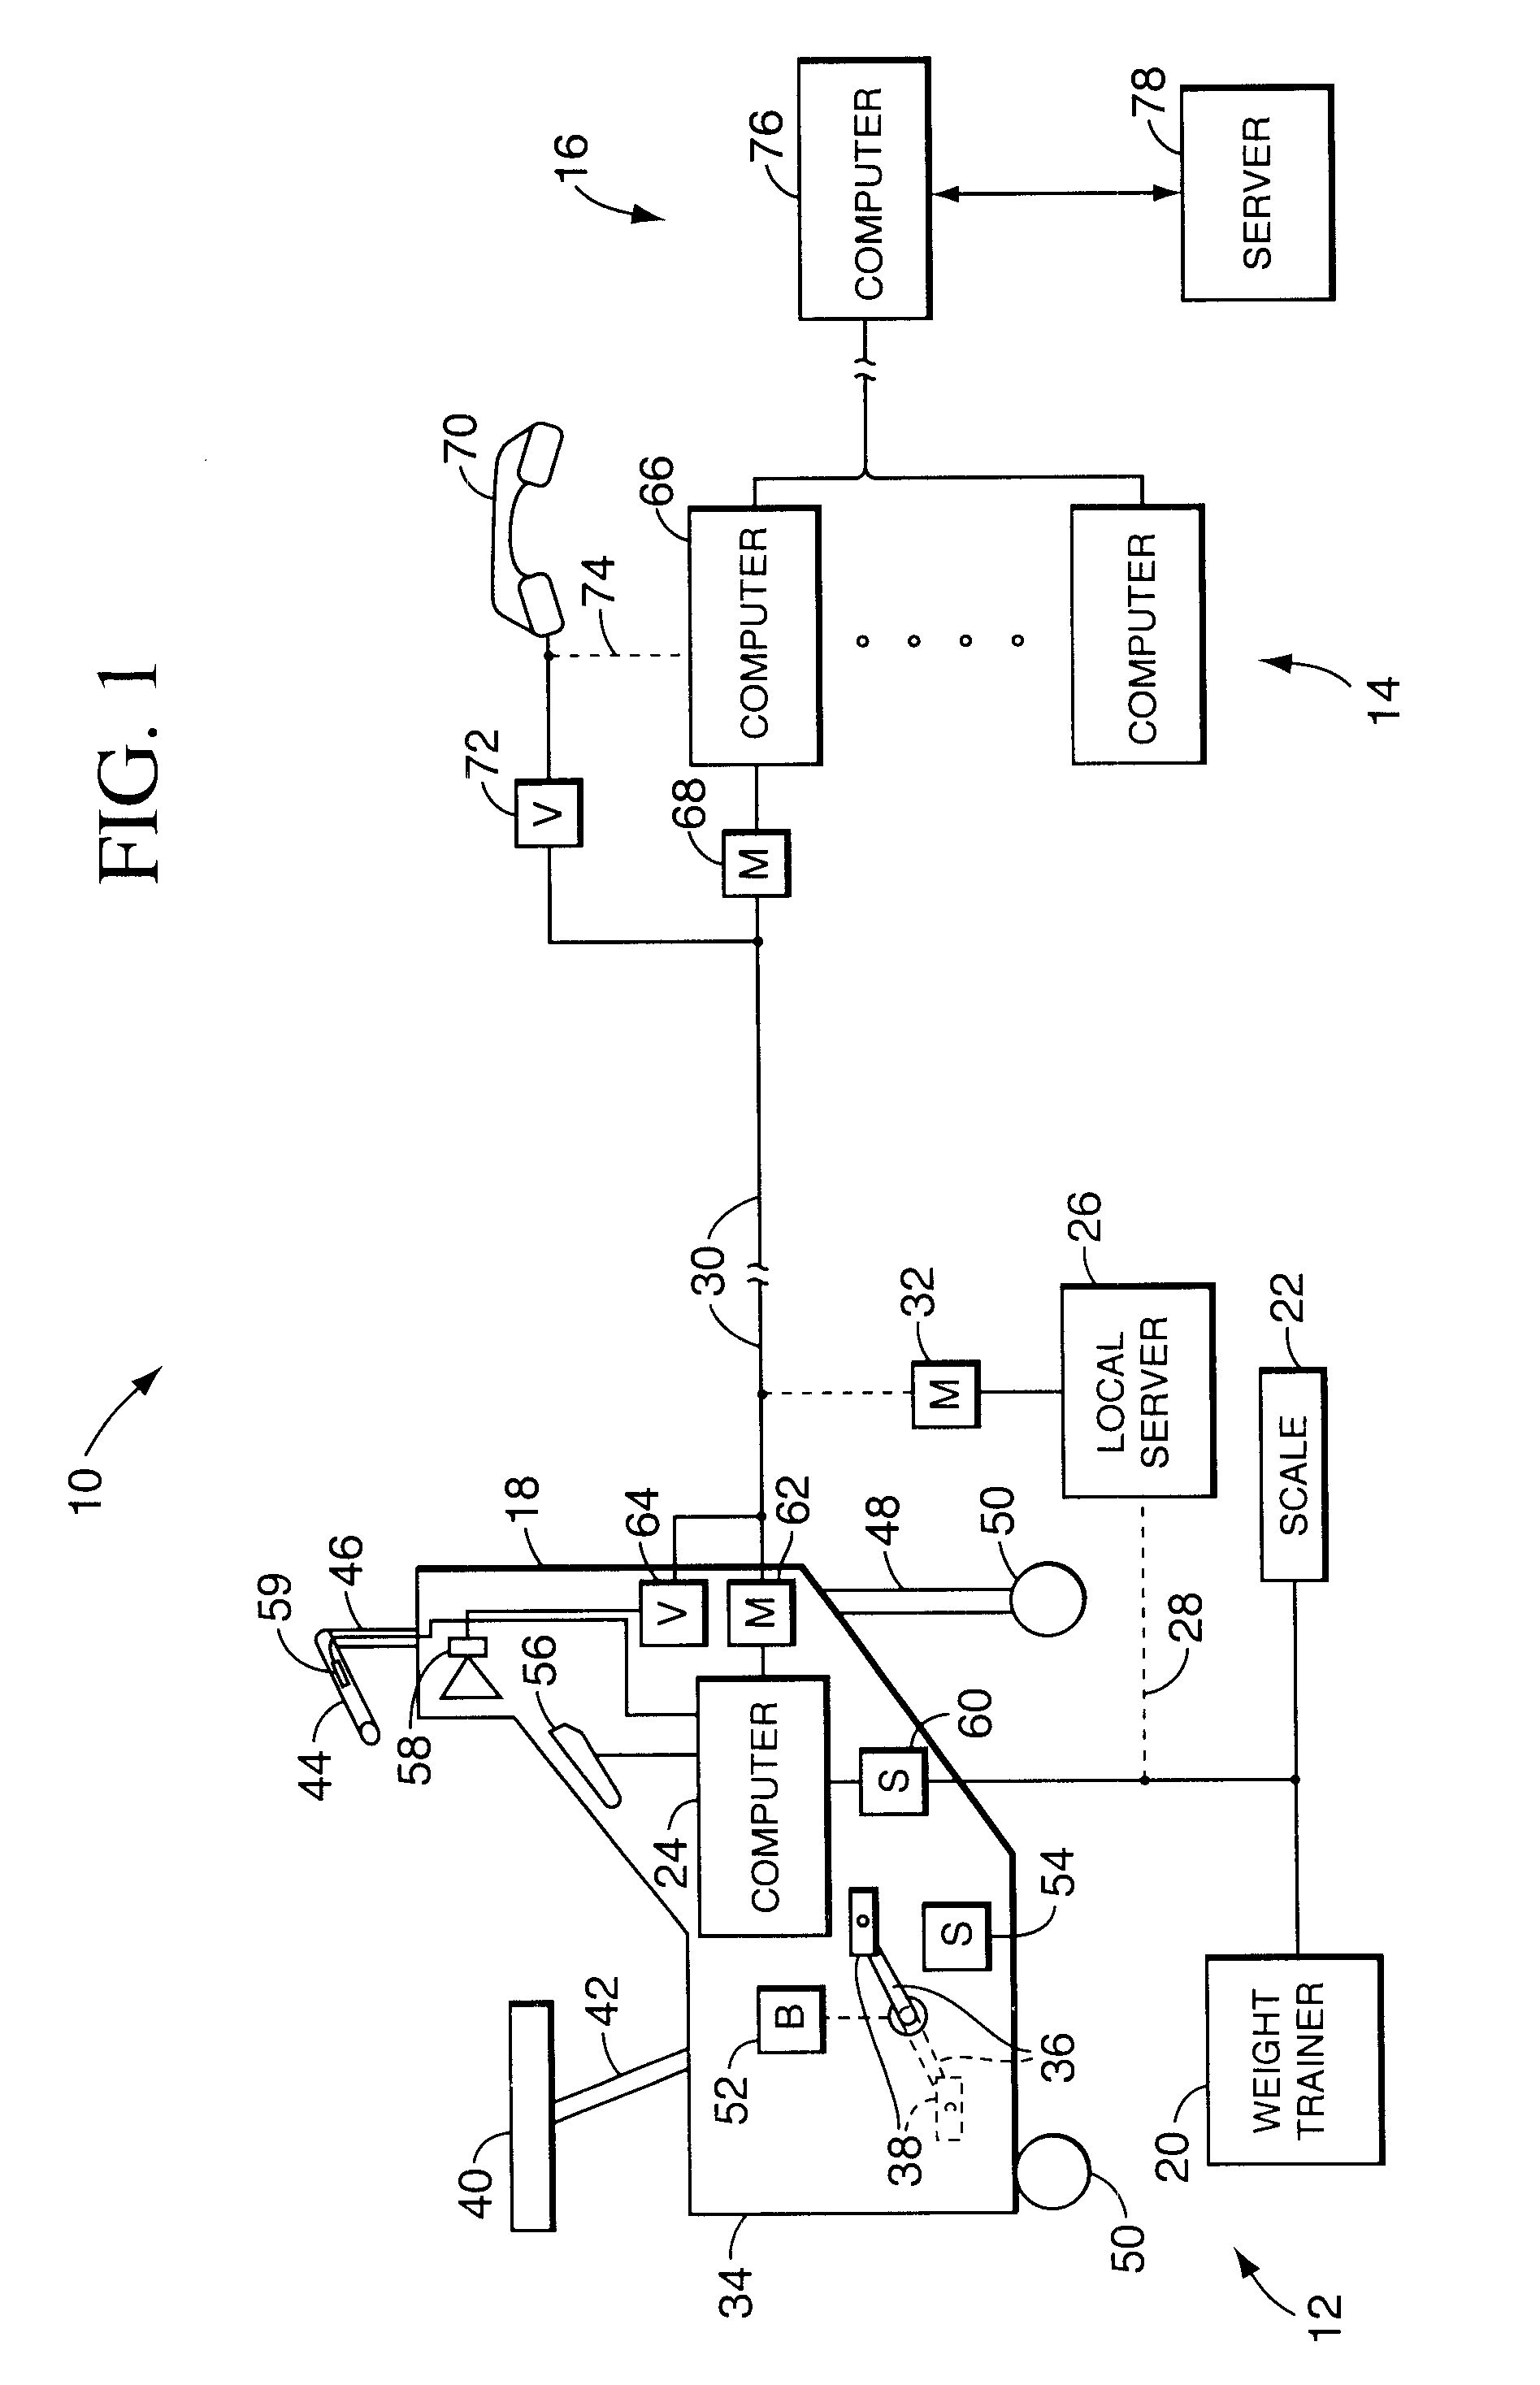 Method and apparatus for remote interactive exercise and health equipment